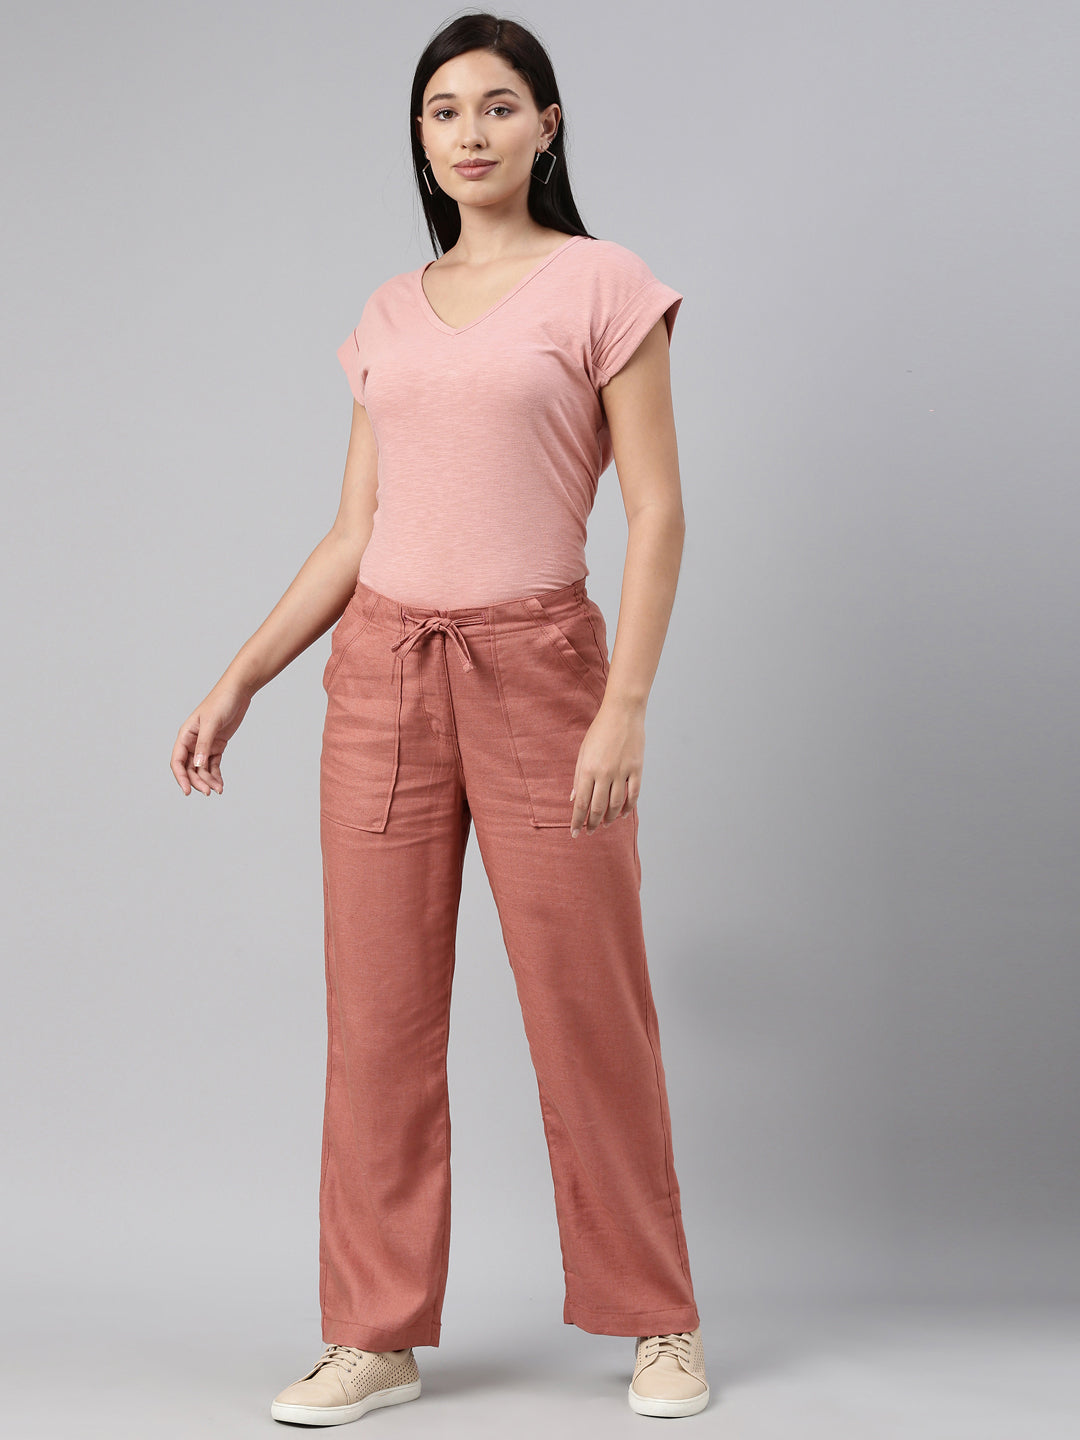 Comfortable Cotton Pants with pockets for women  Go Colors